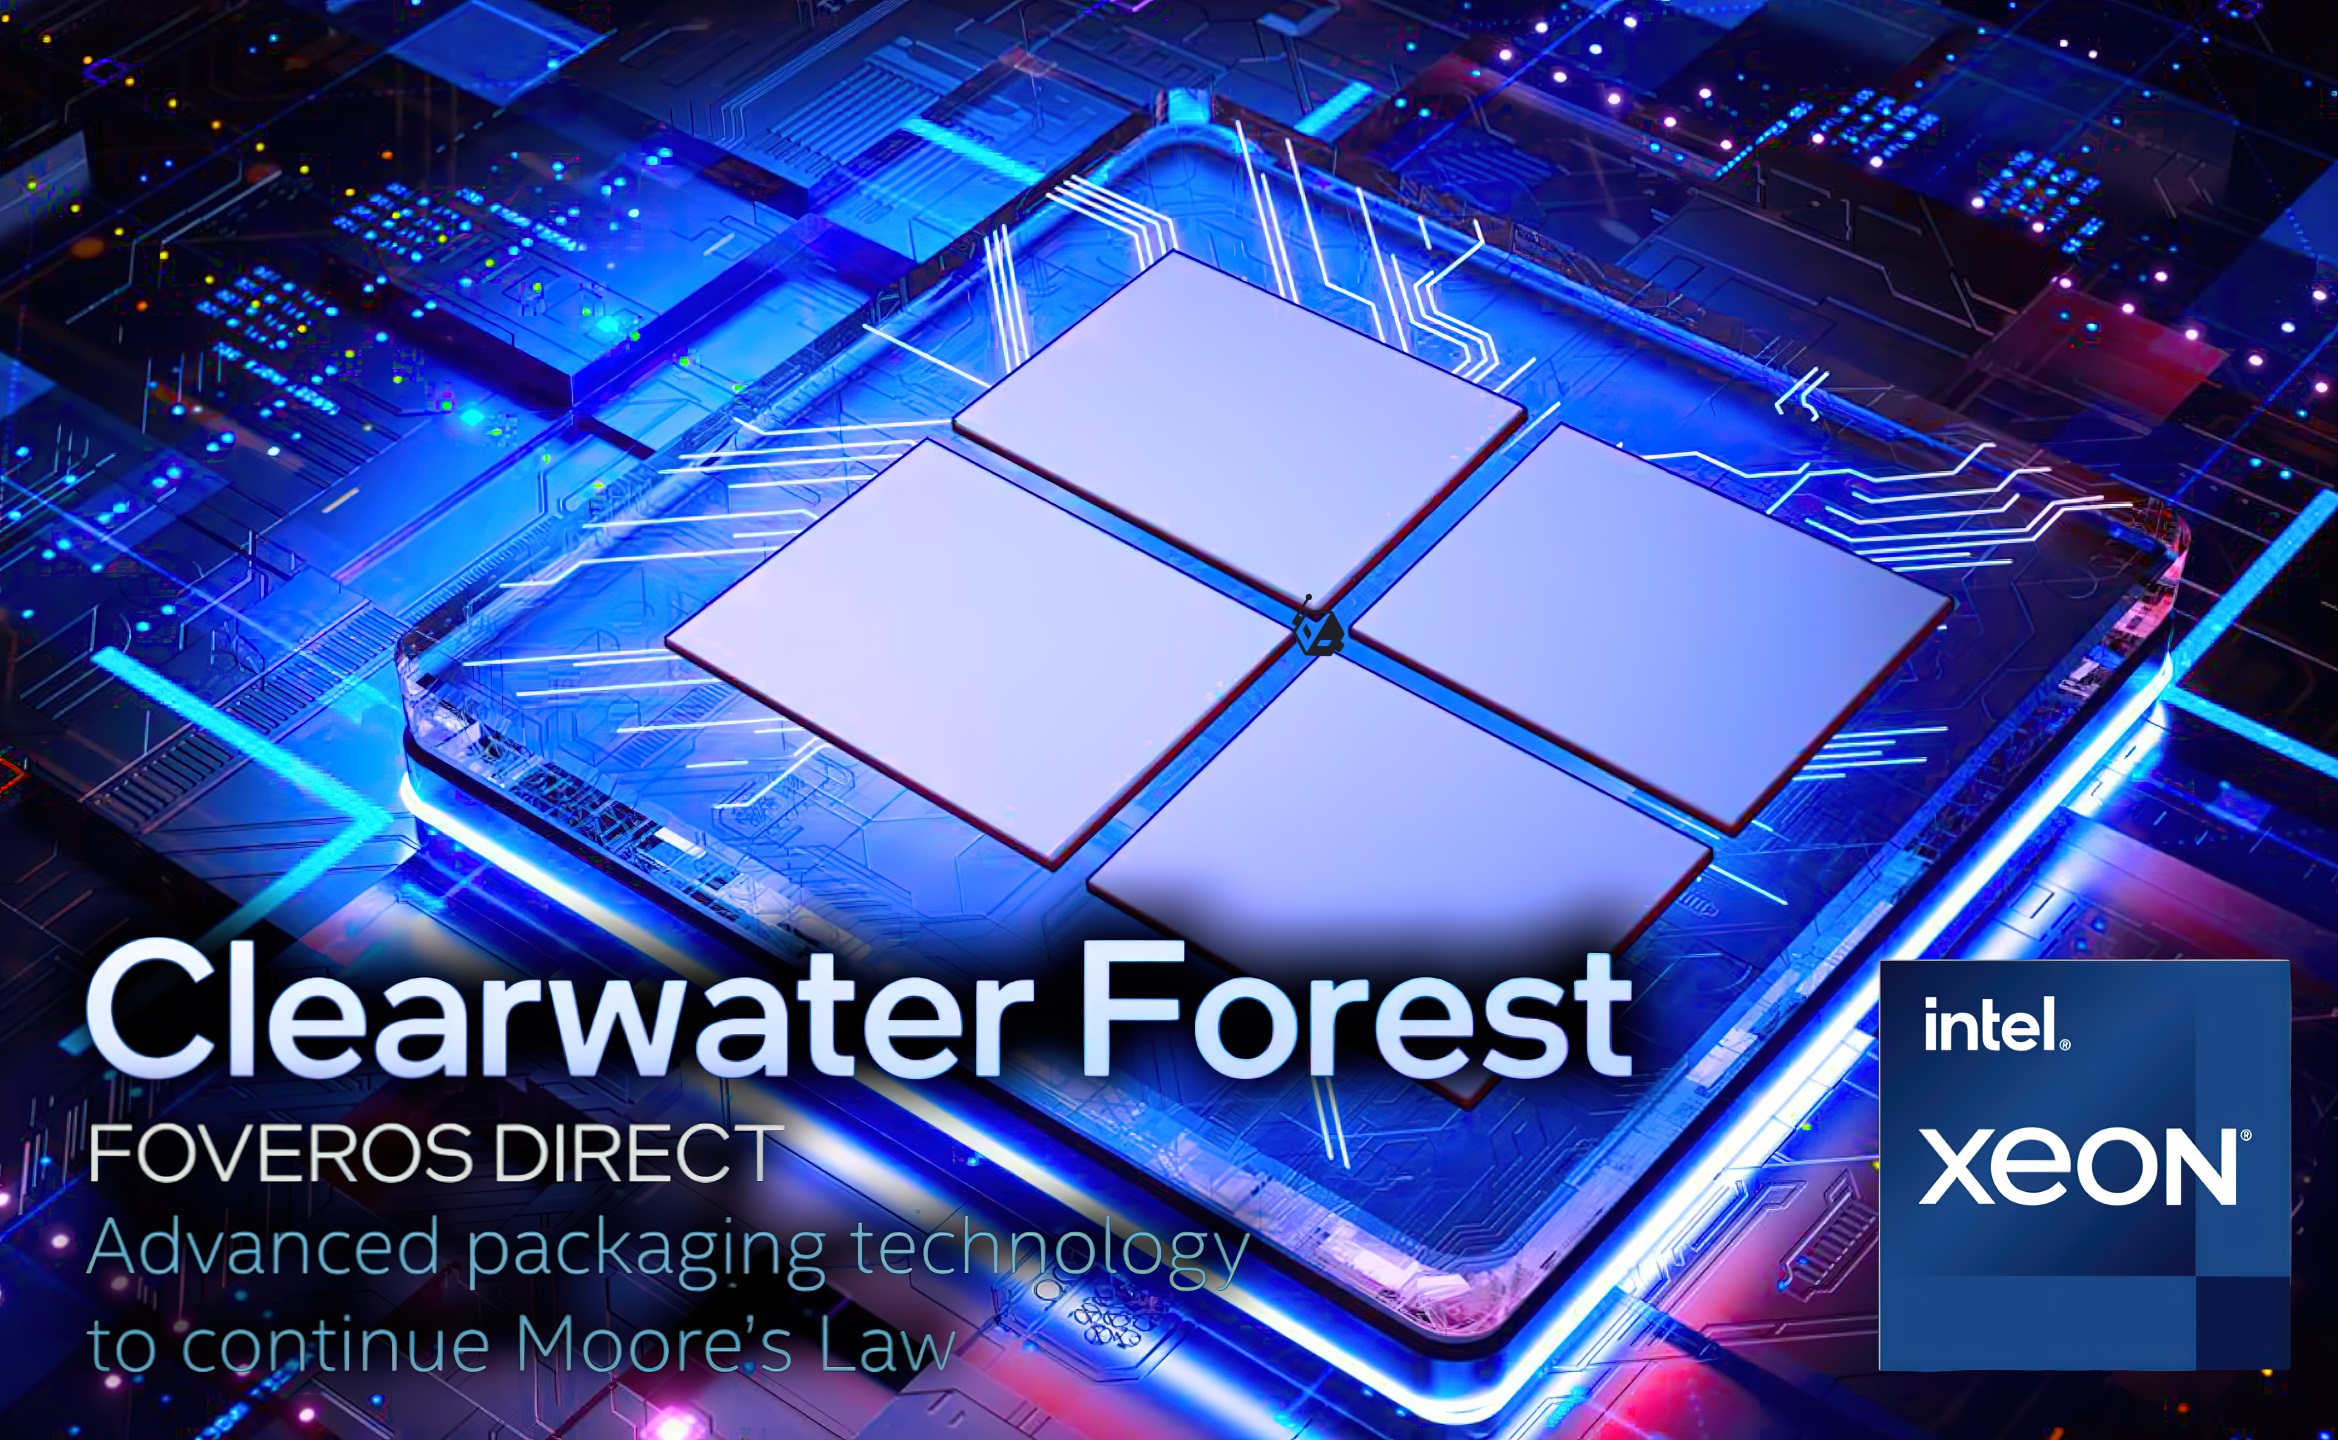 Intel-Clearwater-Forest-Xeon-CPU-3D-Stacking-Foveros-Direct-Technology.jpg